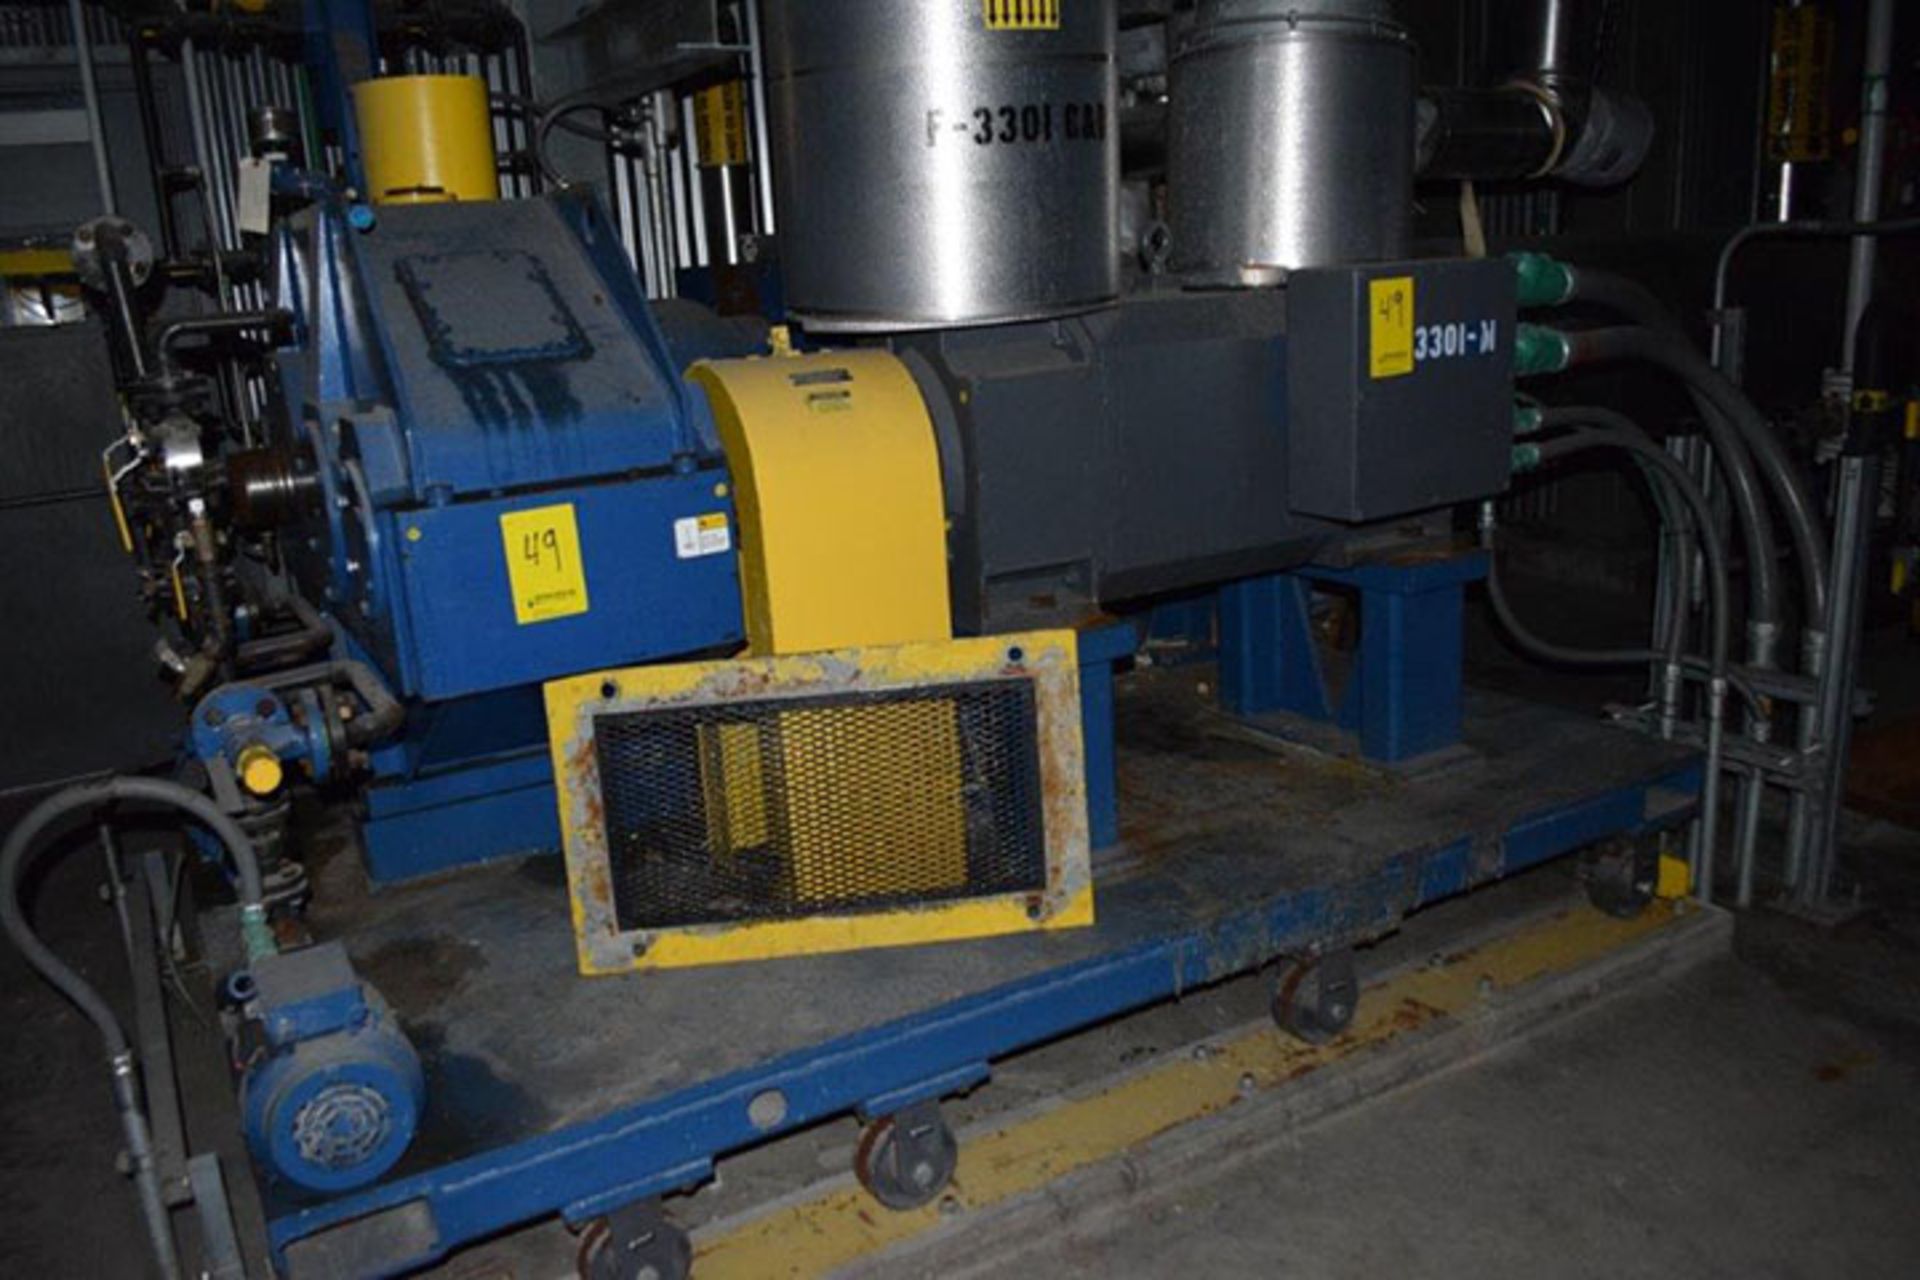 NFM 12" SINGLE SCREW EXTRUDER, APPROX. 24 TO 1 L/D RATIO***Subject to Bulk Sale Lot 49B*** - Image 10 of 17